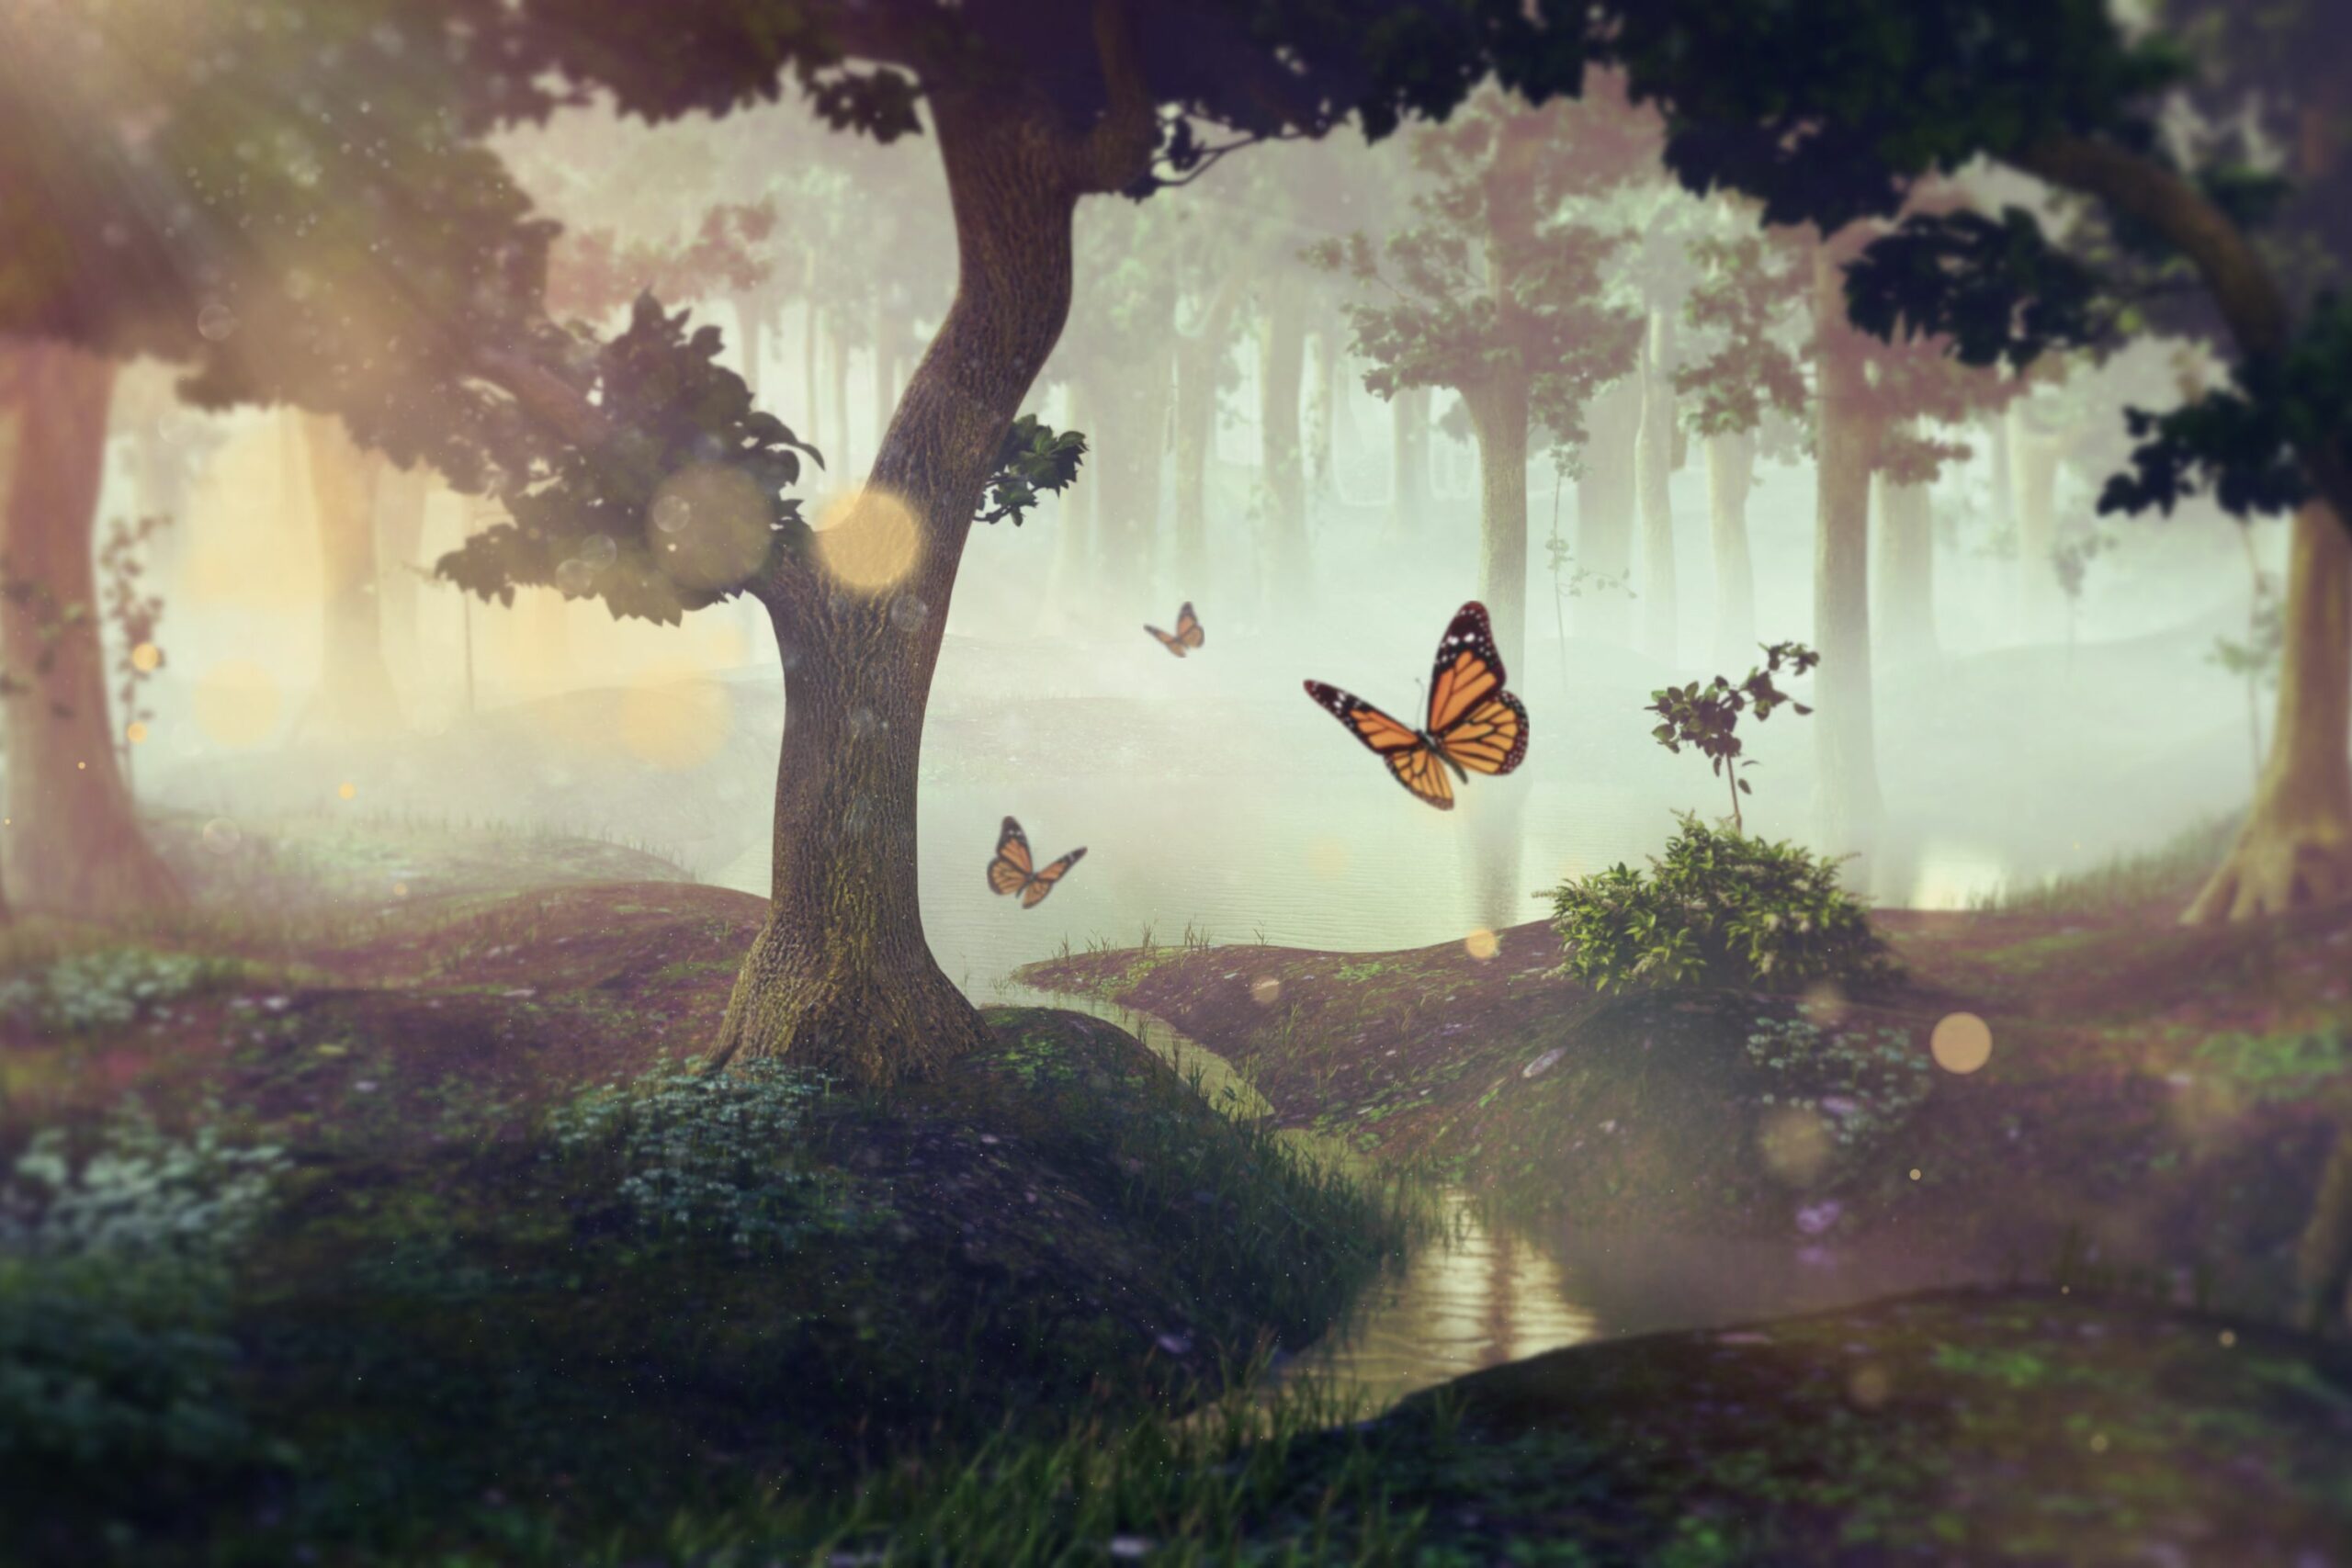 Three orange butterflies in a magical forest, alluding to the spiritual symbolism of butterflies